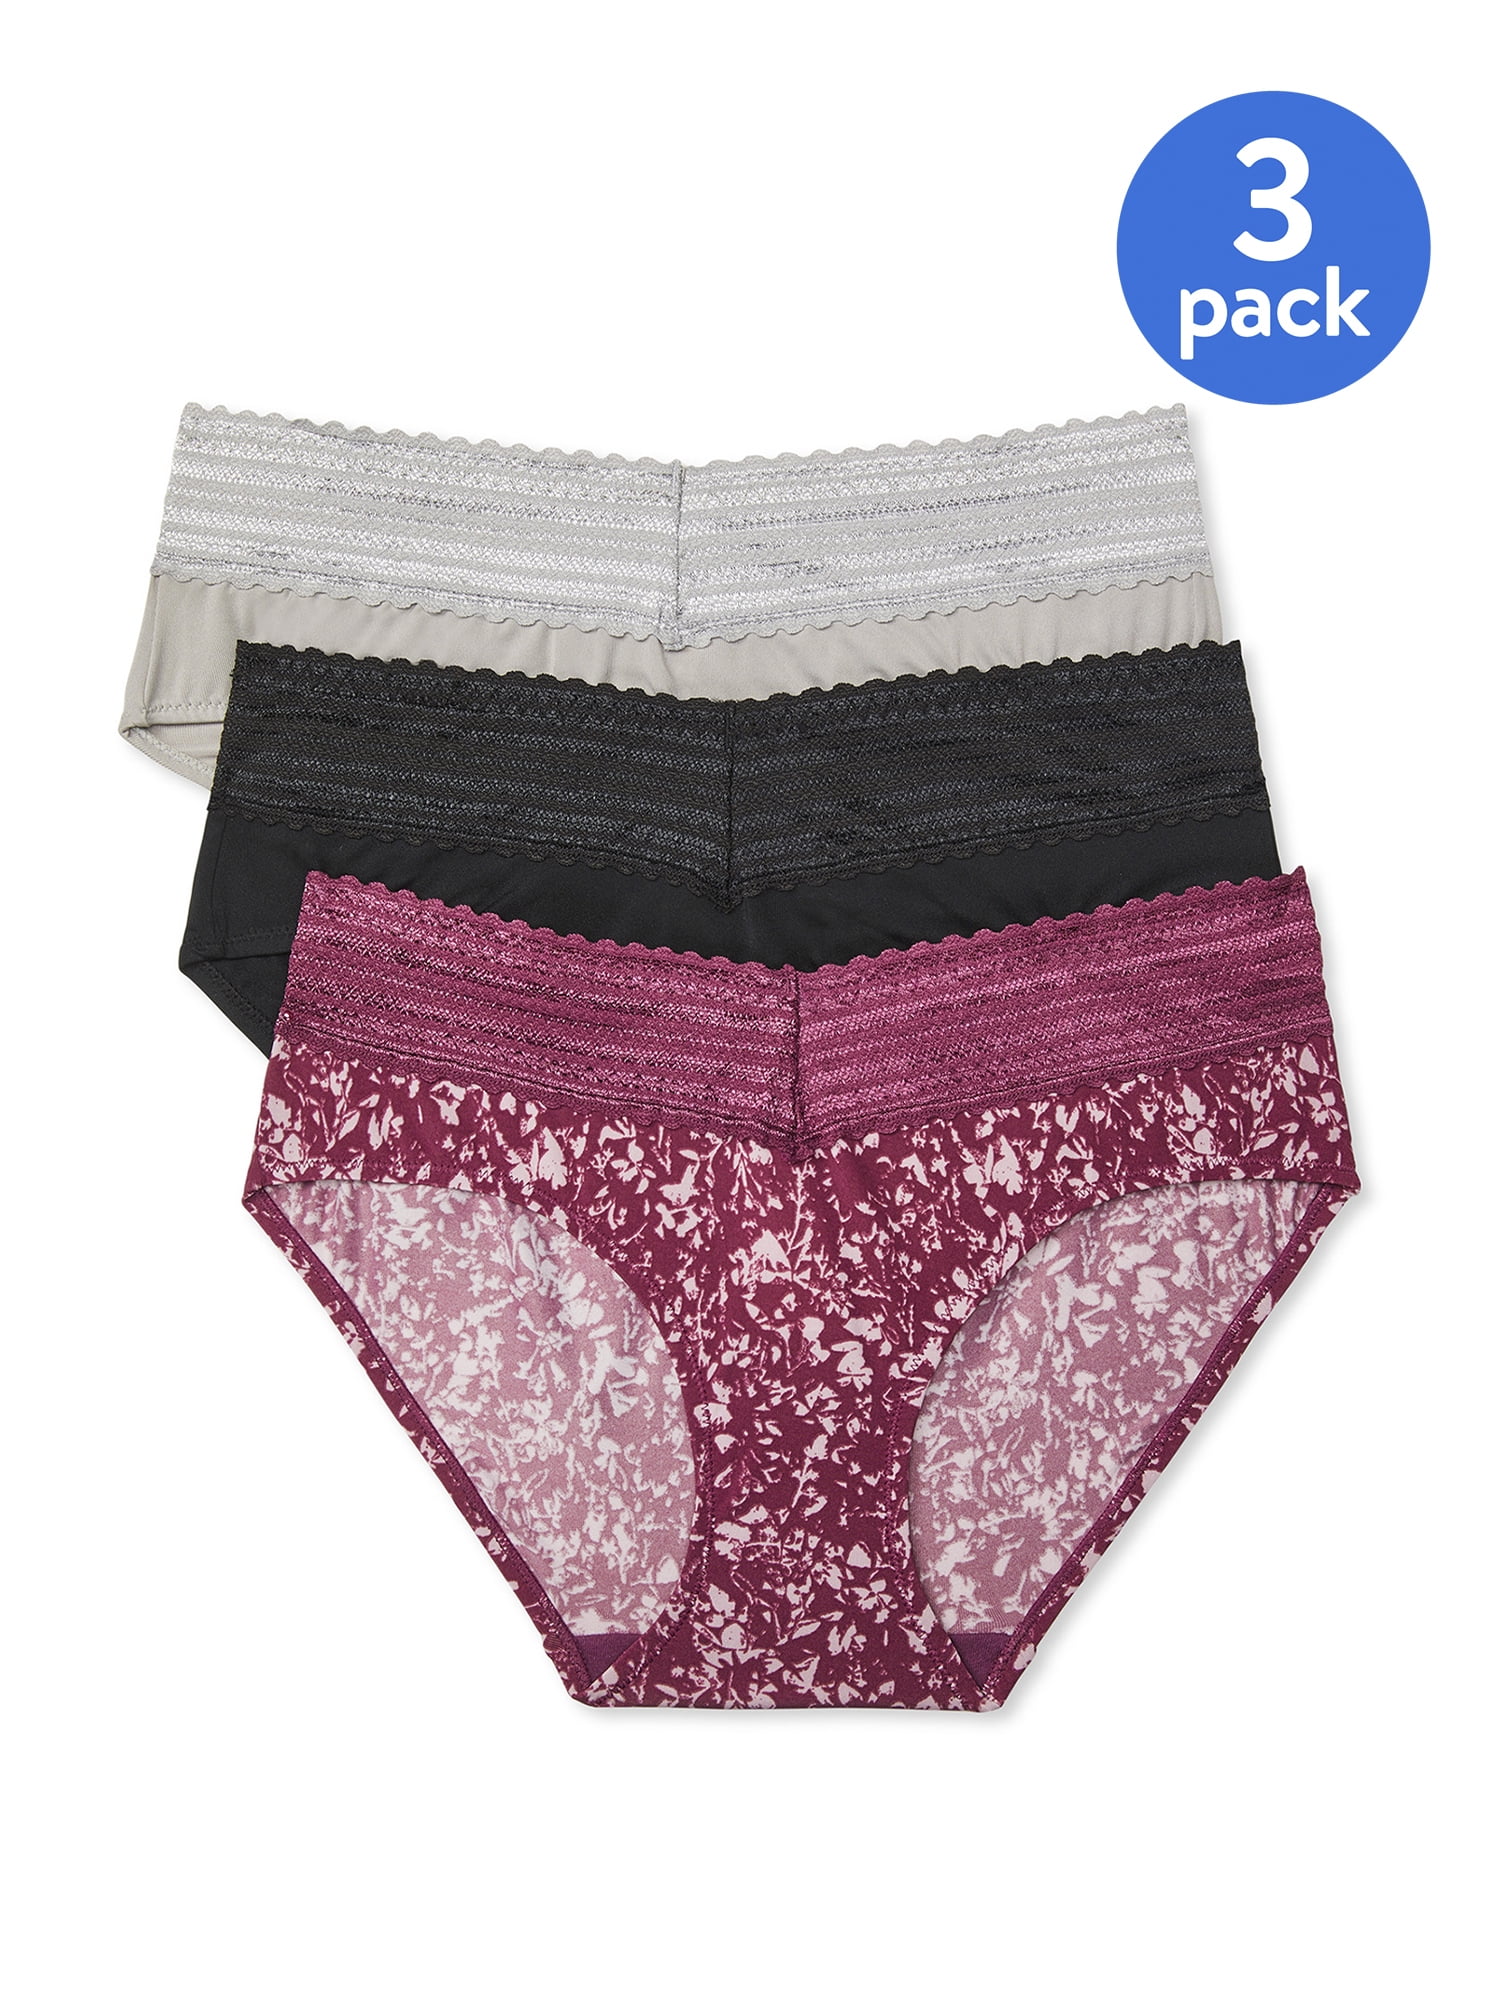 NWT 3 Pack Warner's Hipster Panties Size XL/8  Lot Of 3 J7-3 No Muffin Top 